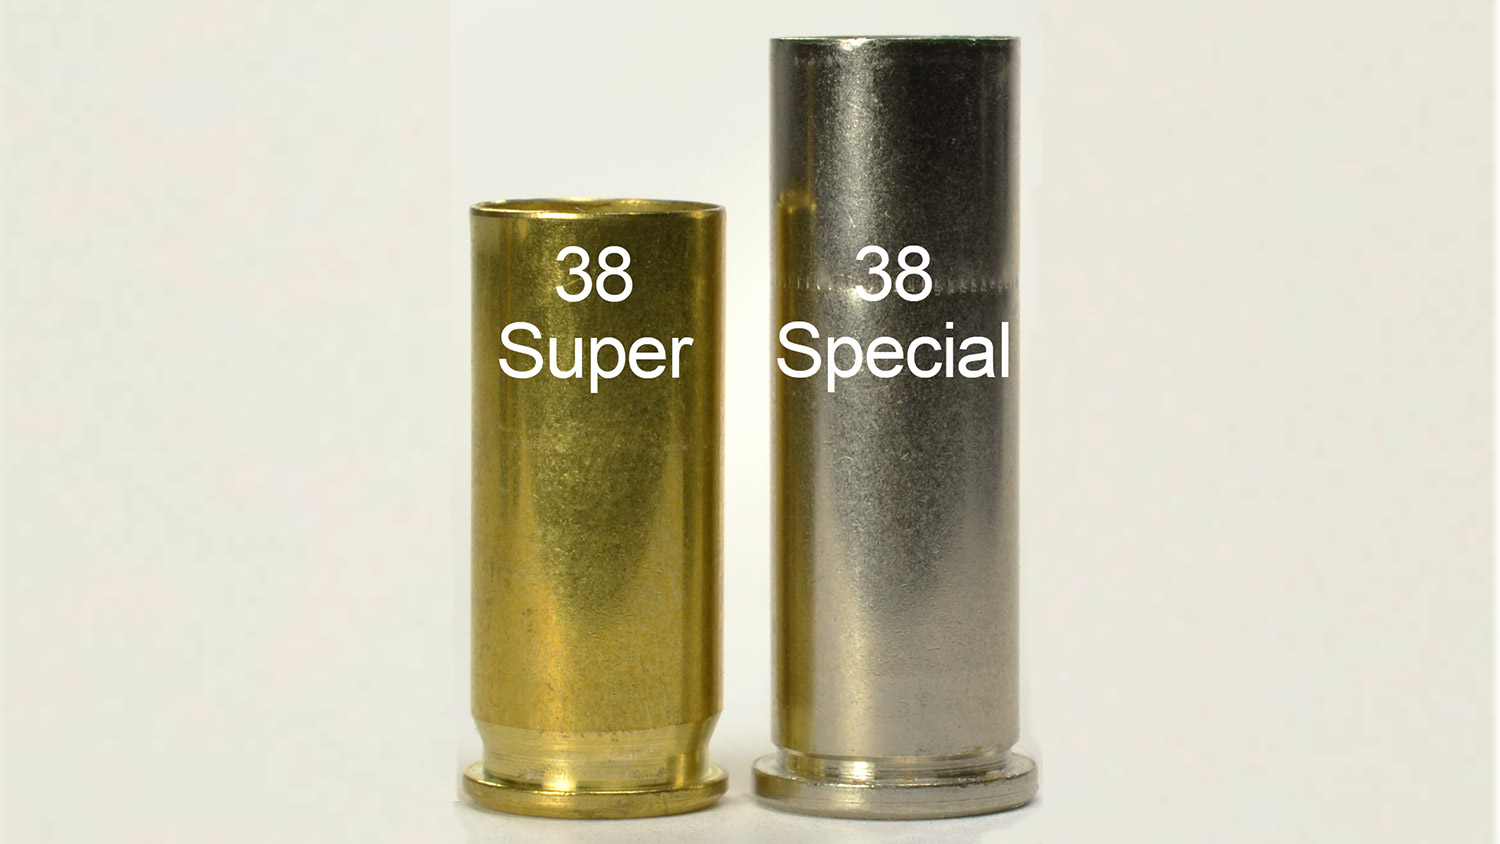 .38 Super and .38 Special cases